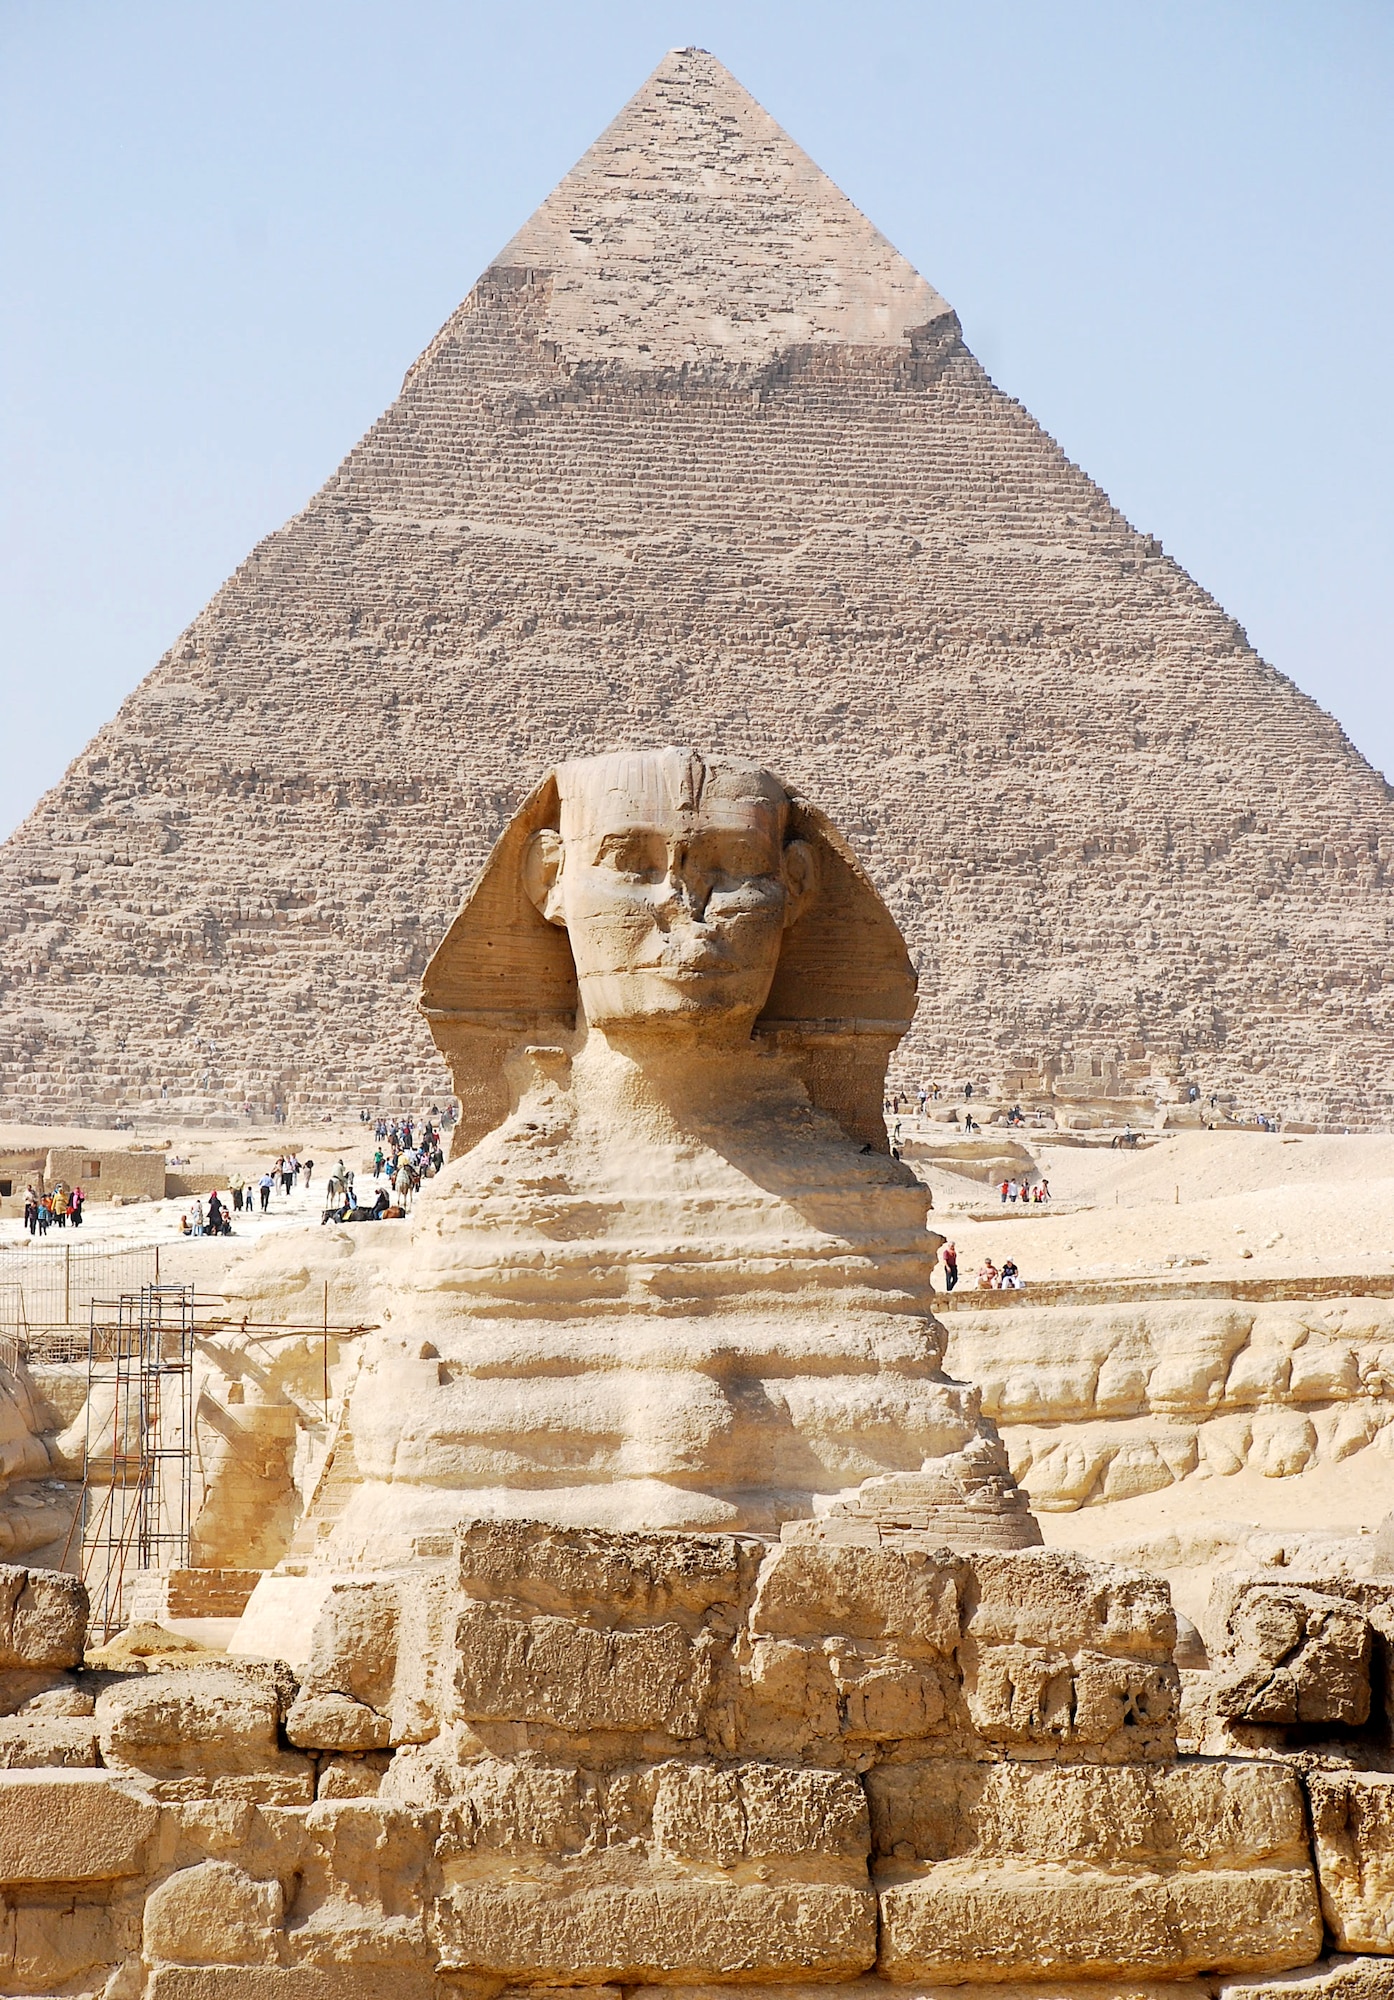 The Great Sphinx of Giza lies on the Giza Plateau with the famous Pyramids of Giza just in the distance, near Cairo, Egypt. The Sphinx is a statue of a reclining lion with a human head that is believed to have been built by ancient Egyptians between 2555 B.C. and 2523 B.C. It is one of the most famous and recognizable pieces of history in the Cairo area. (U.S. Air Force photo/Senior Airman Sara Csurilla)